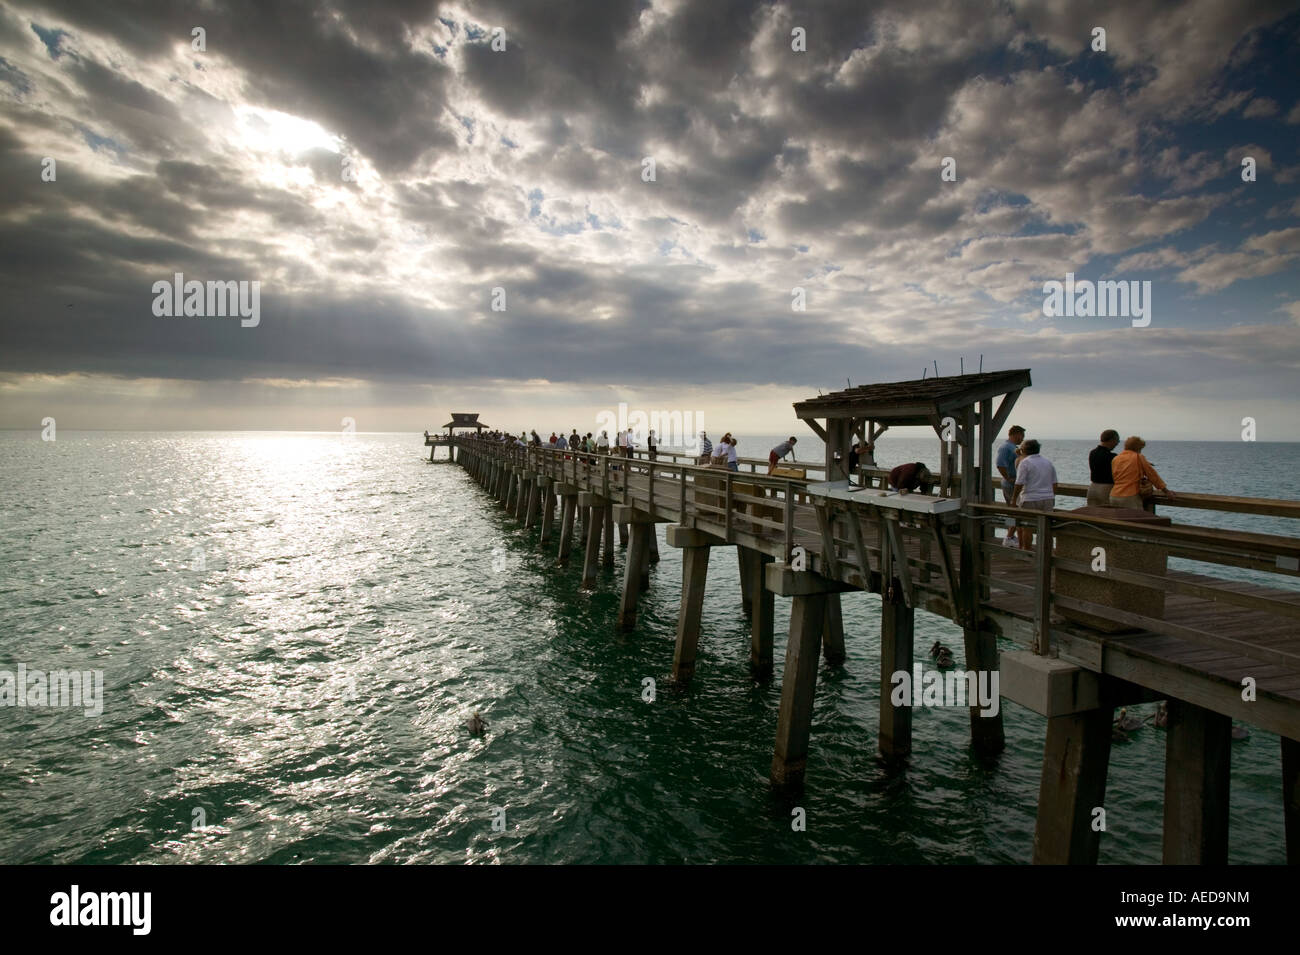 The old wooden pier at Naples beach with dramatic stormy sky and shafts of sunlight over the sea Stock Photo